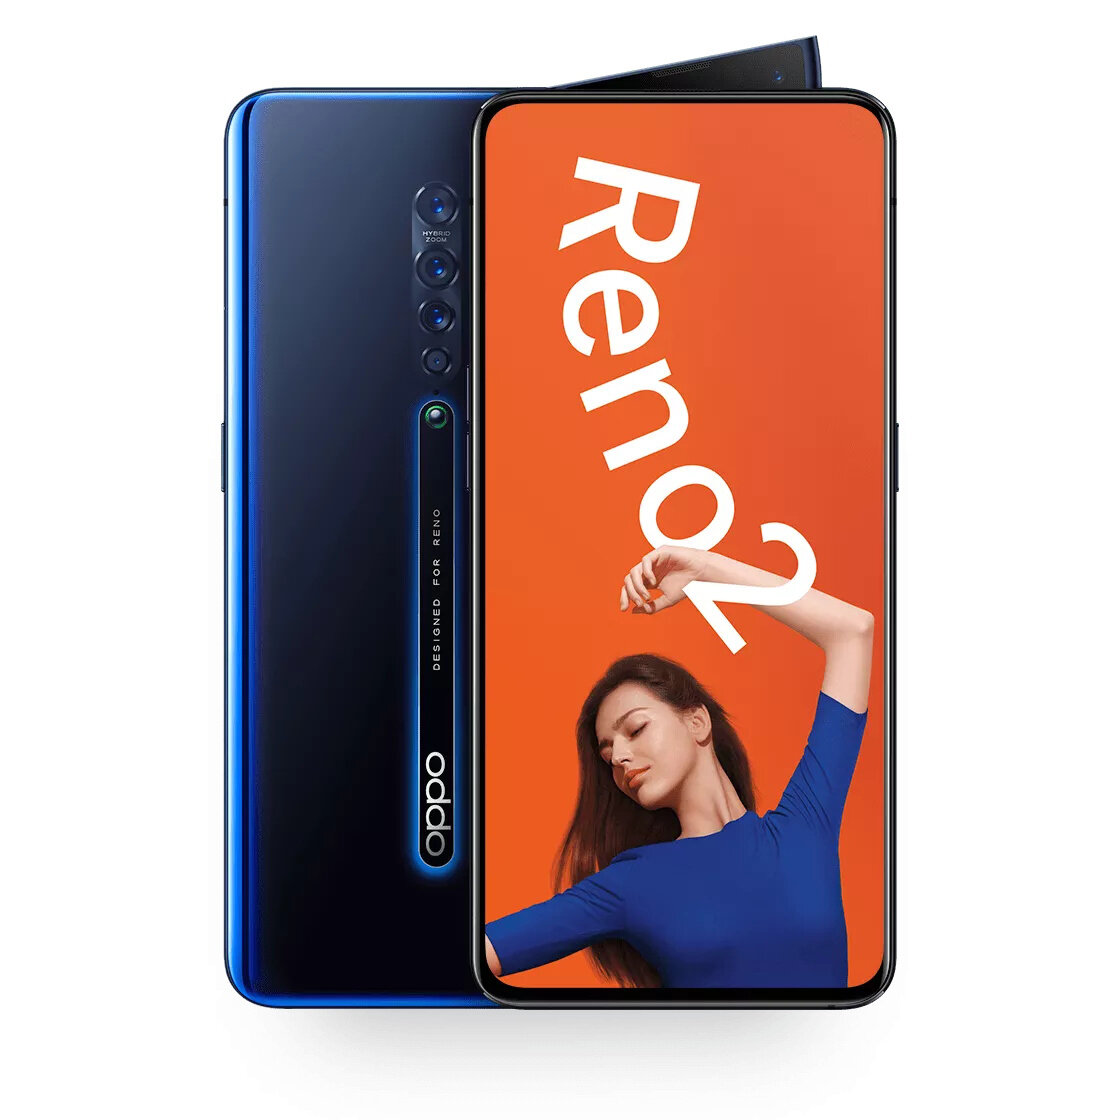 OPPO Reno2 CN Version 6.5 inch FHD+ NFC 4000mAh 48MP Quad Rear Cameras 8GB RAM 128GB ROM Snapdragon 730G Octa Core 2.2GHz 4G Smartphone Smartphones from Mobile Phones & Accessories on banggood.com